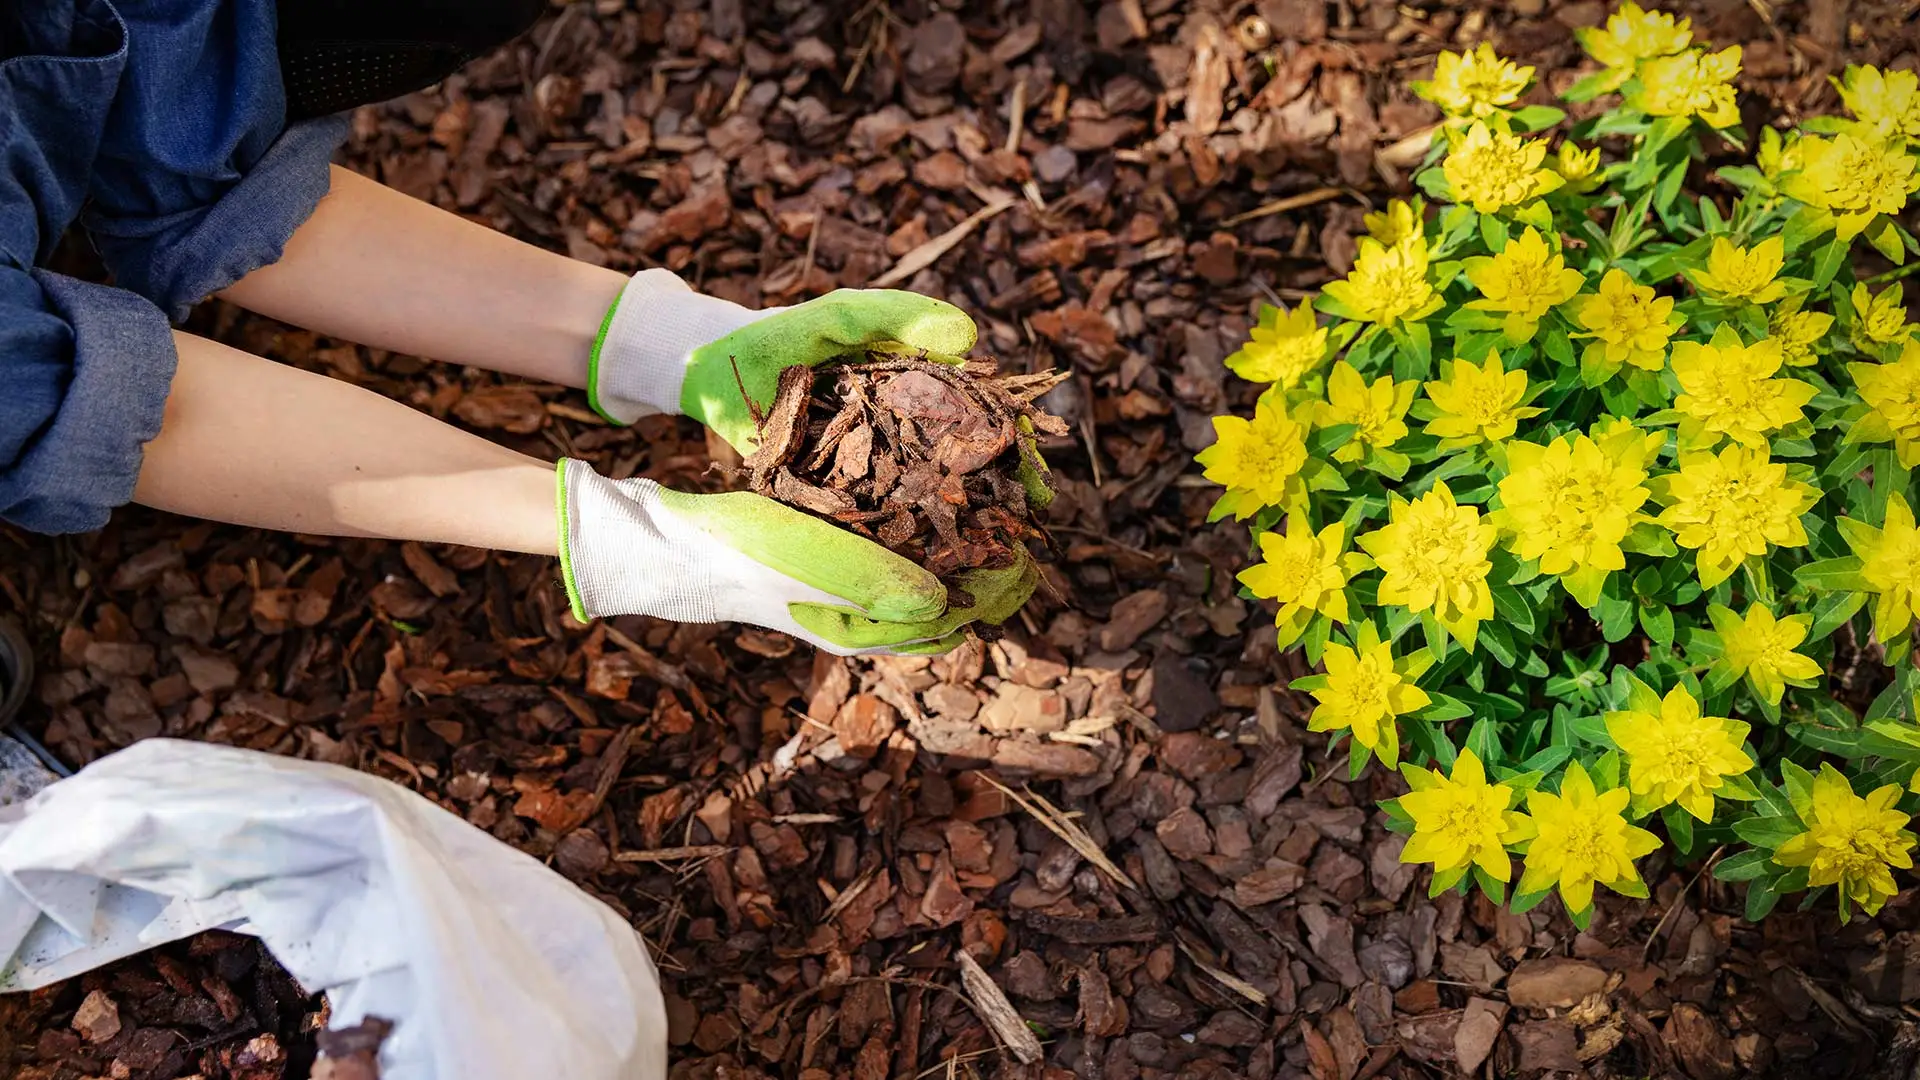 Winter Is Here - Time to Have Mulch Installed in Your Landscape Beds